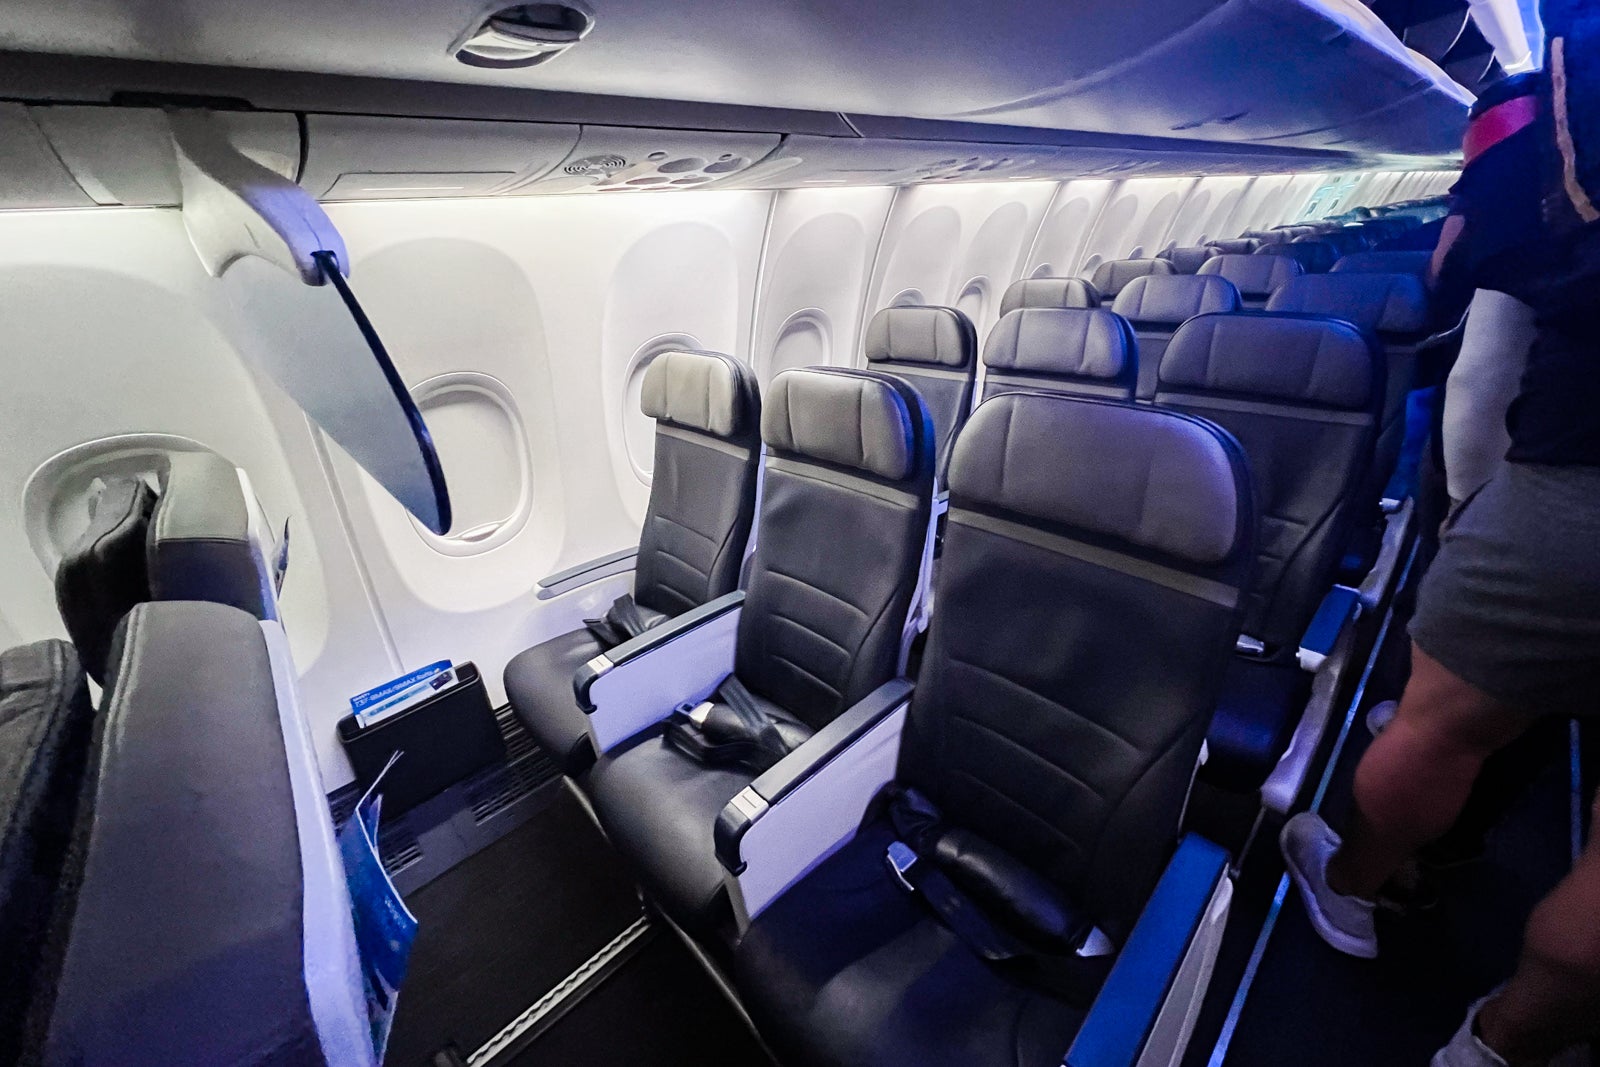 8 reasons why you should always sit in an aisle seat on planes